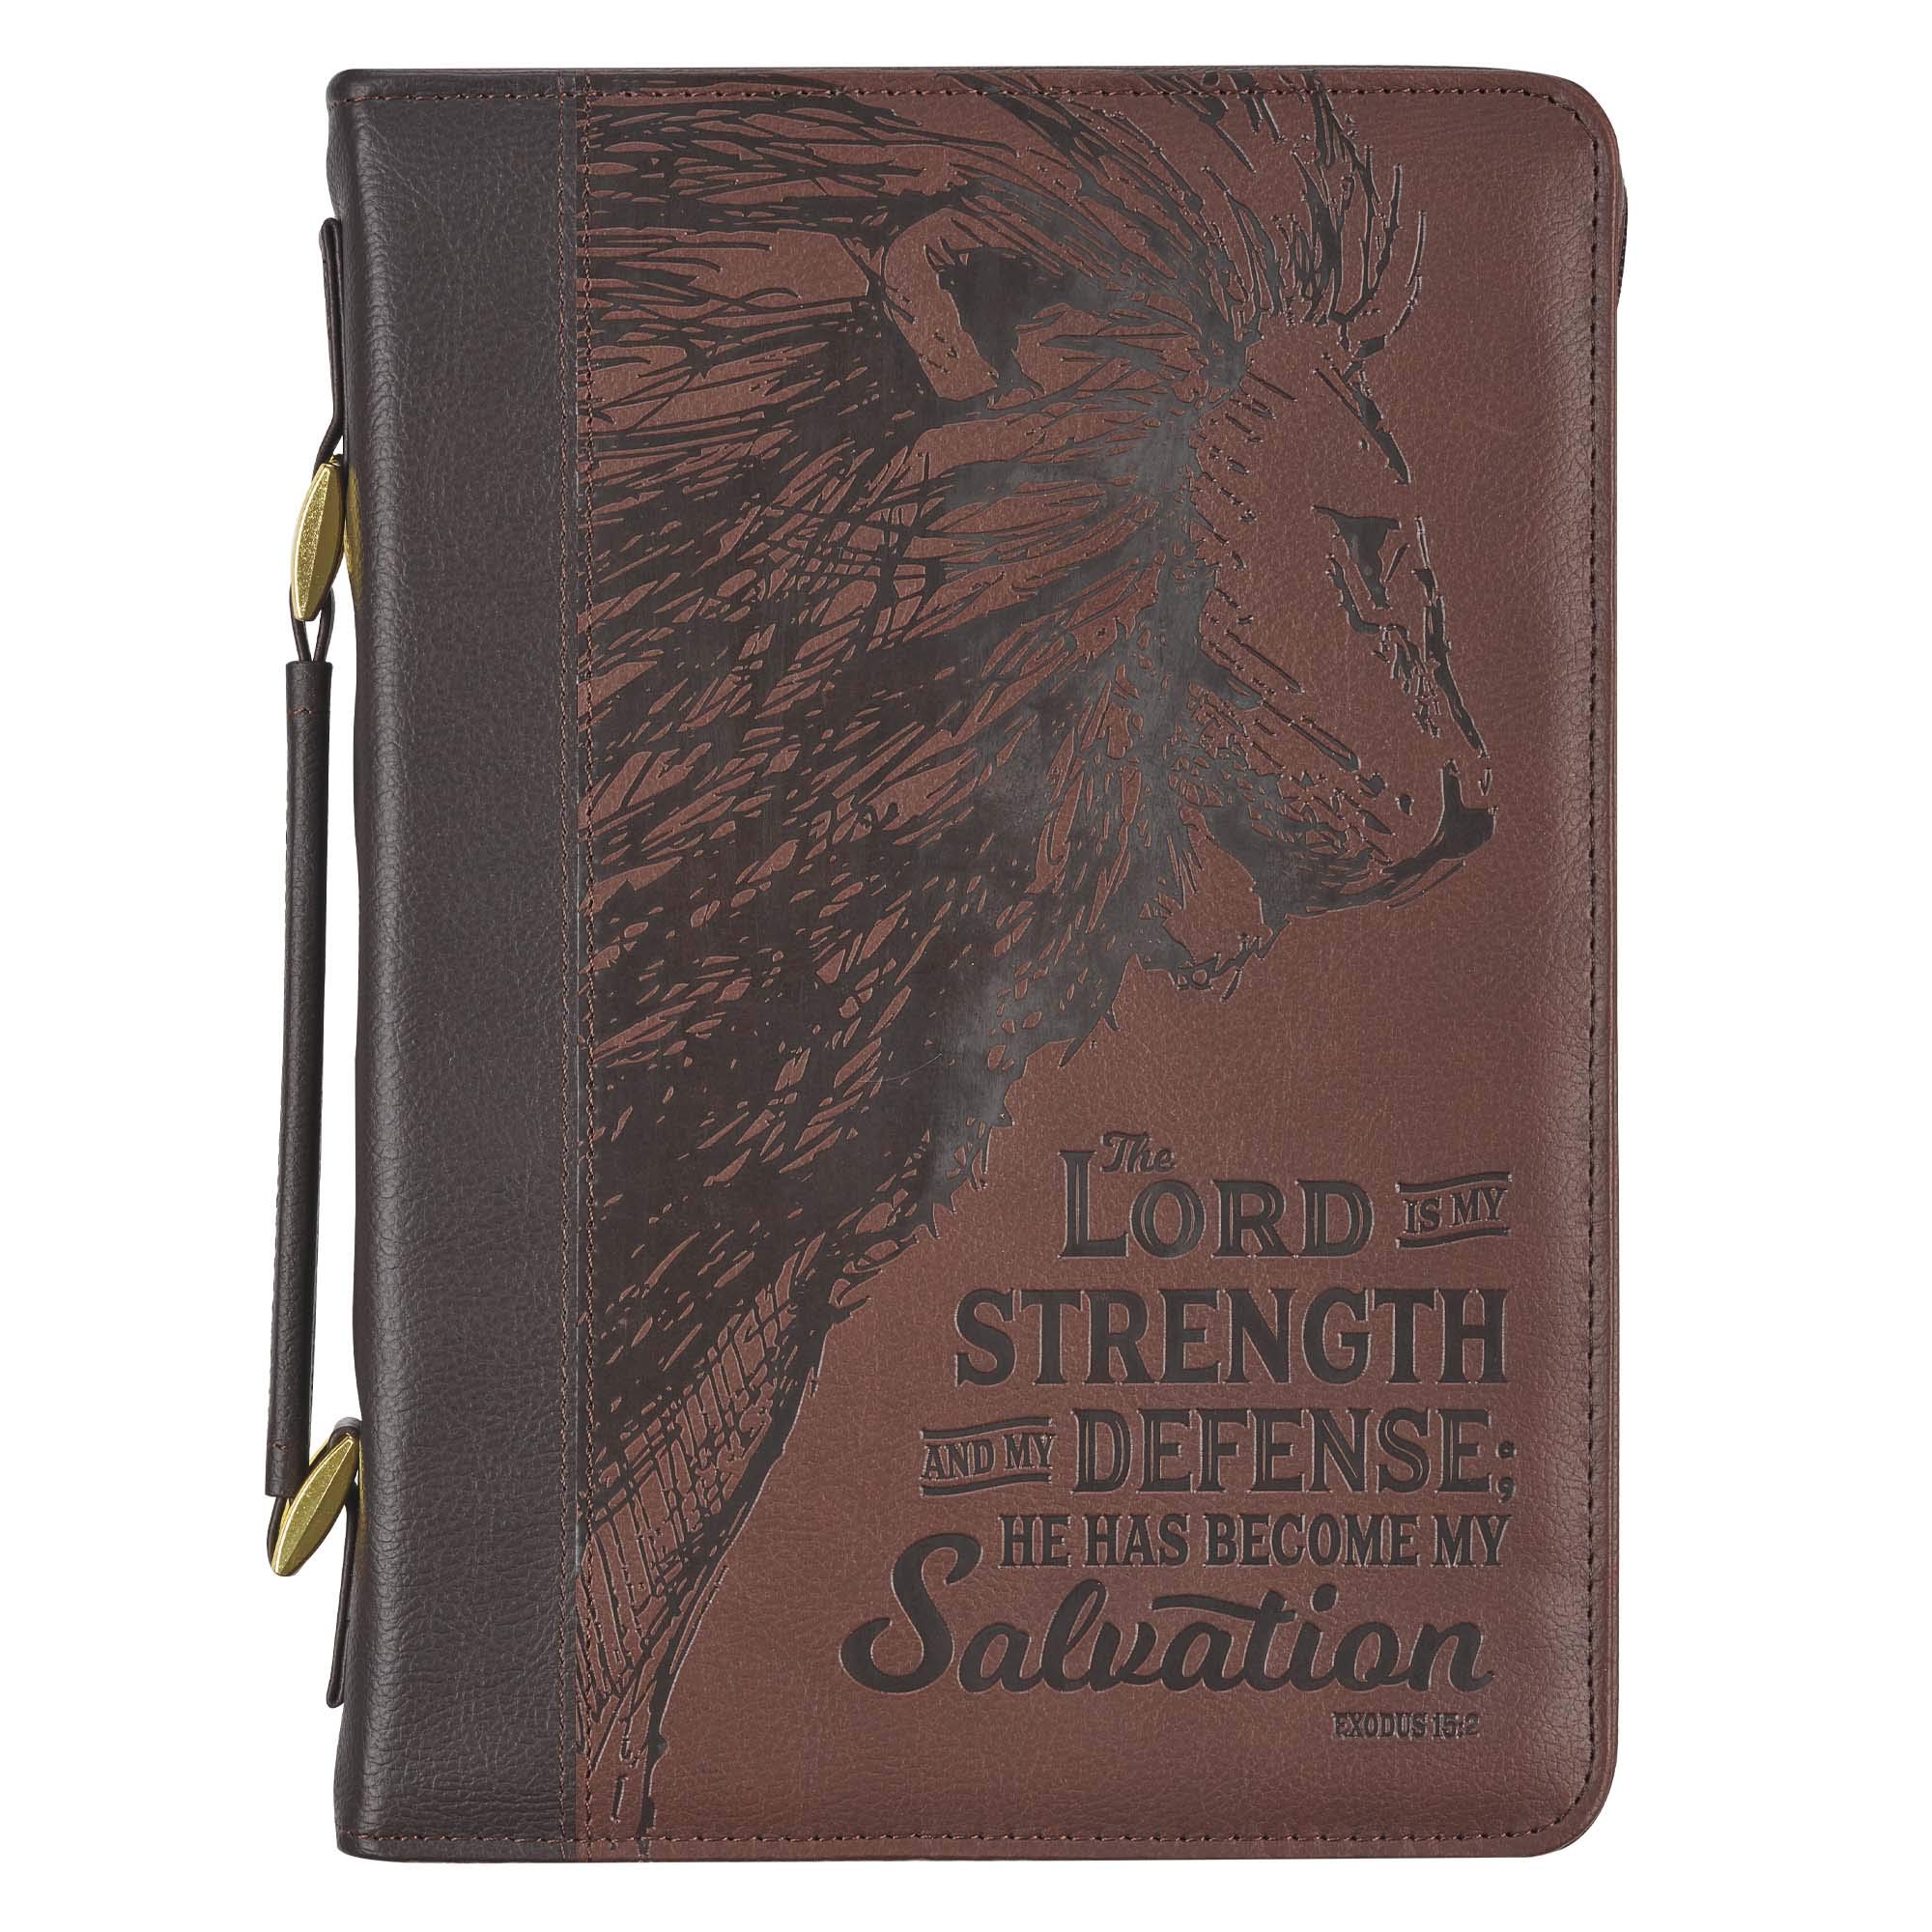 Christian Art Gifts Men's Classic Bible Cover The Lord is My Strength Lion Exodus 15:2, Brown Faux Leather, Large